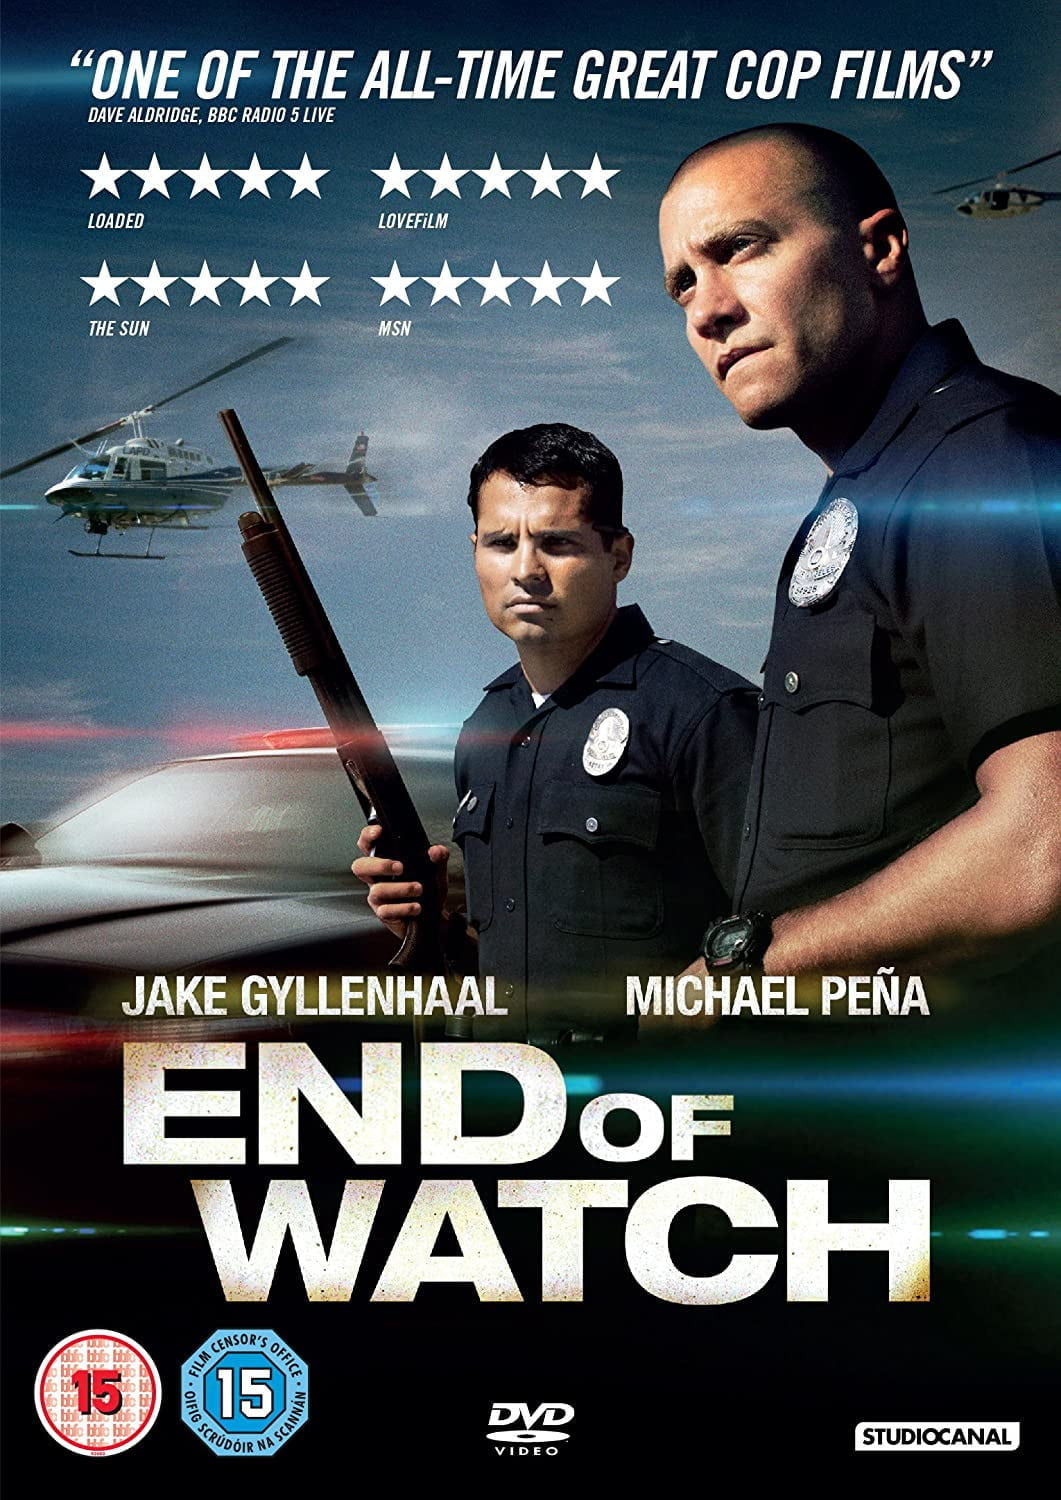 End of Watch Chatbot - Socialdraft